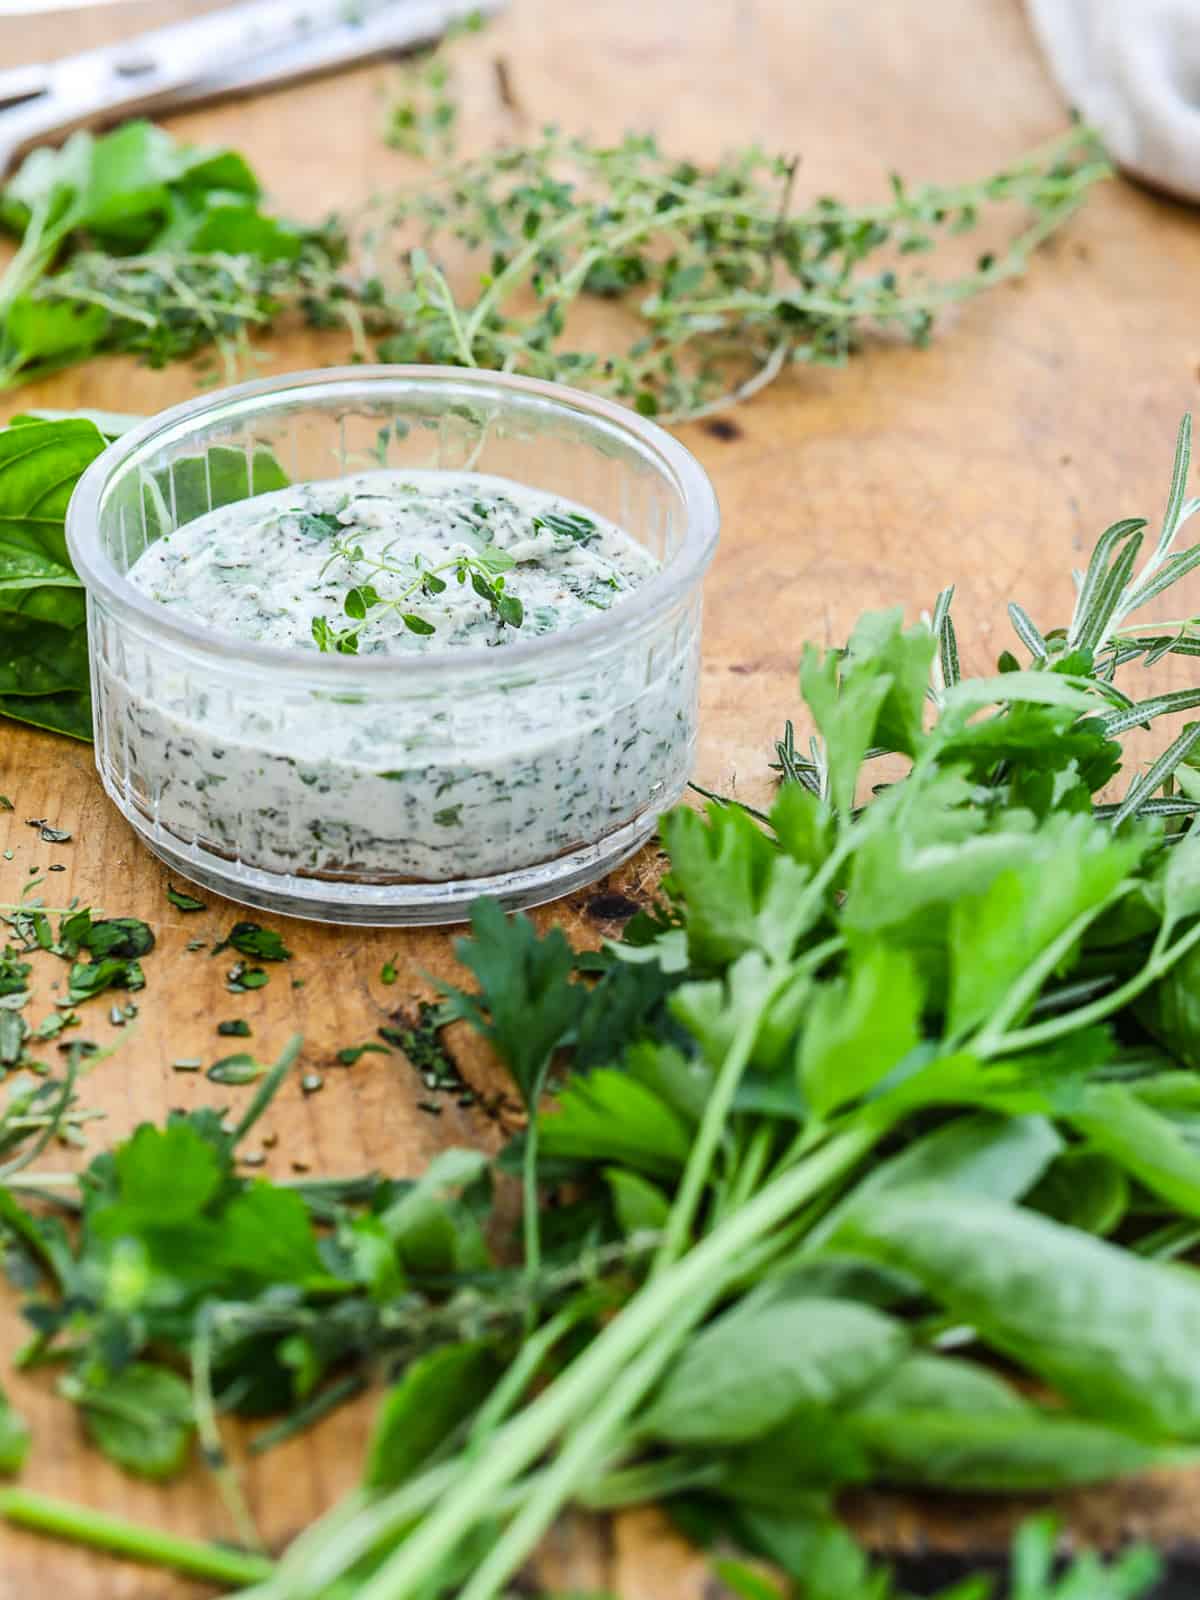 Herb butter in a small glass container on a cutting board with herbs.